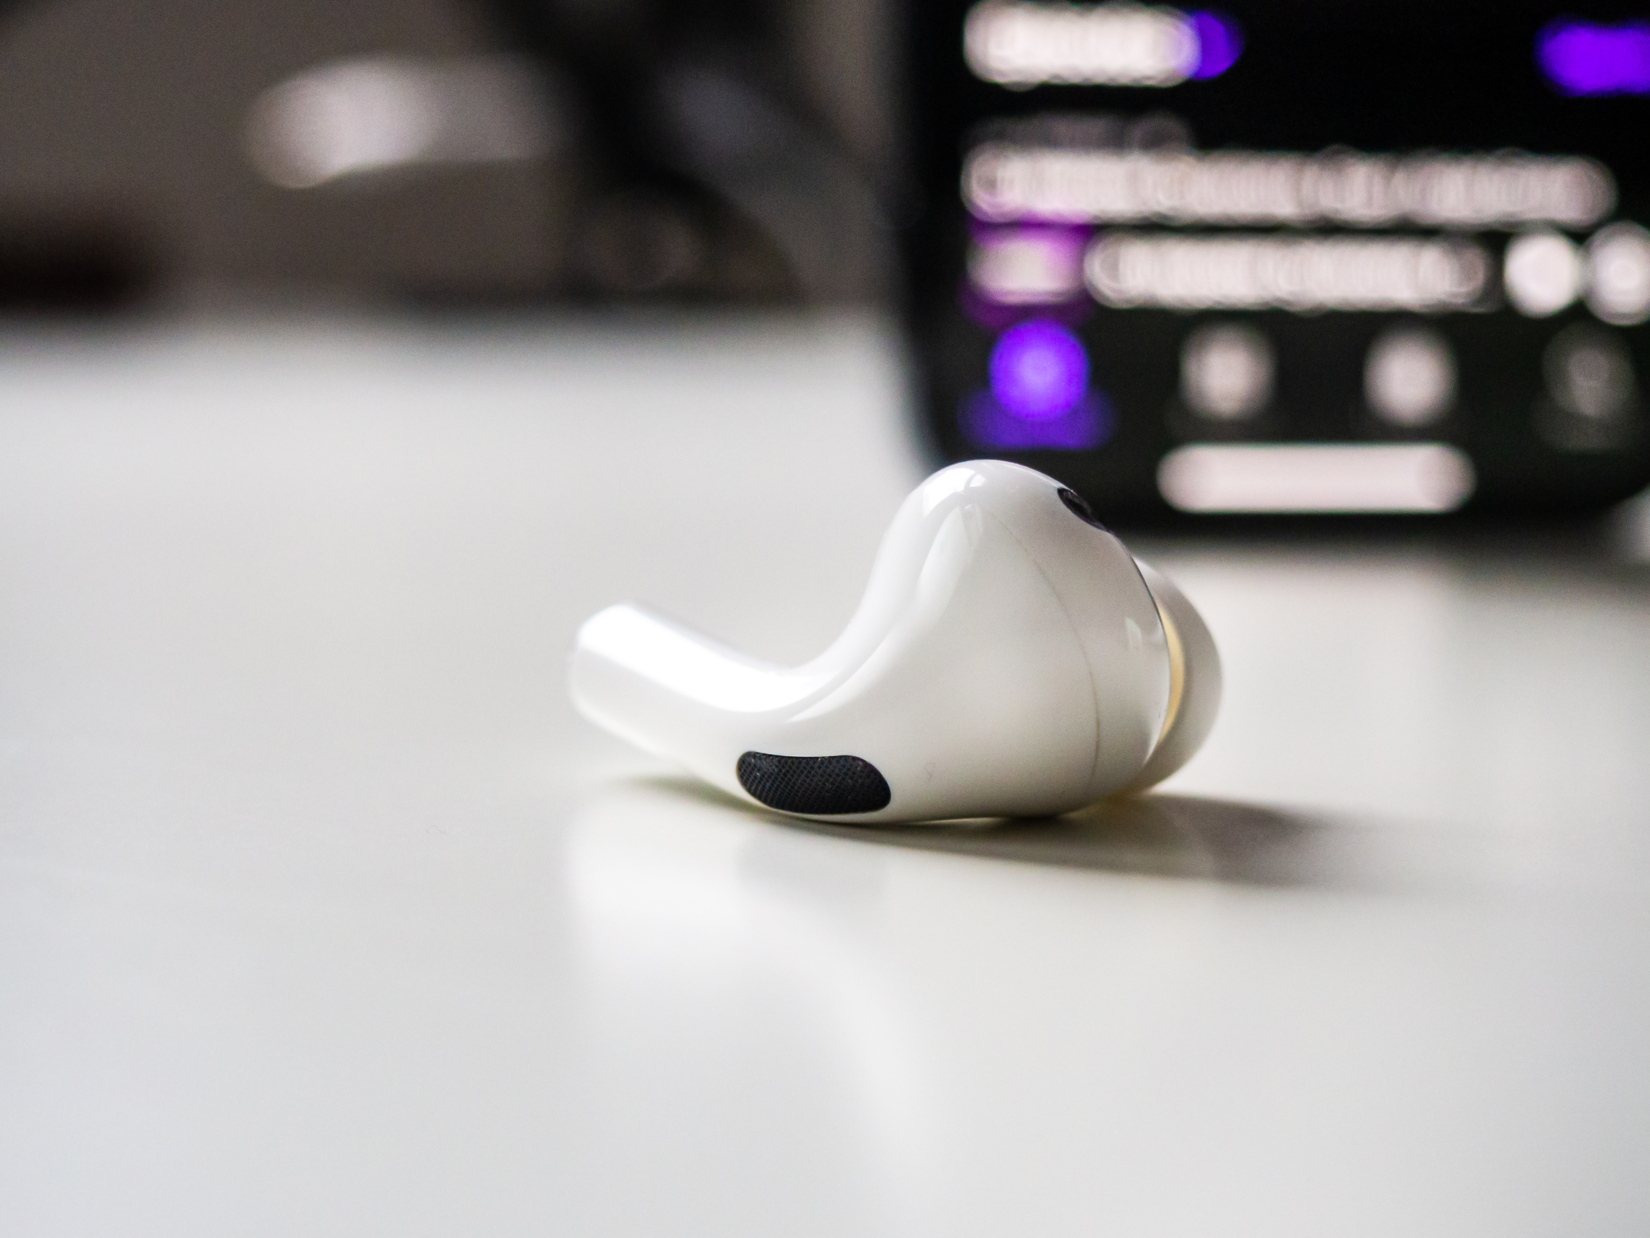 Earbud on White Desk with Phone